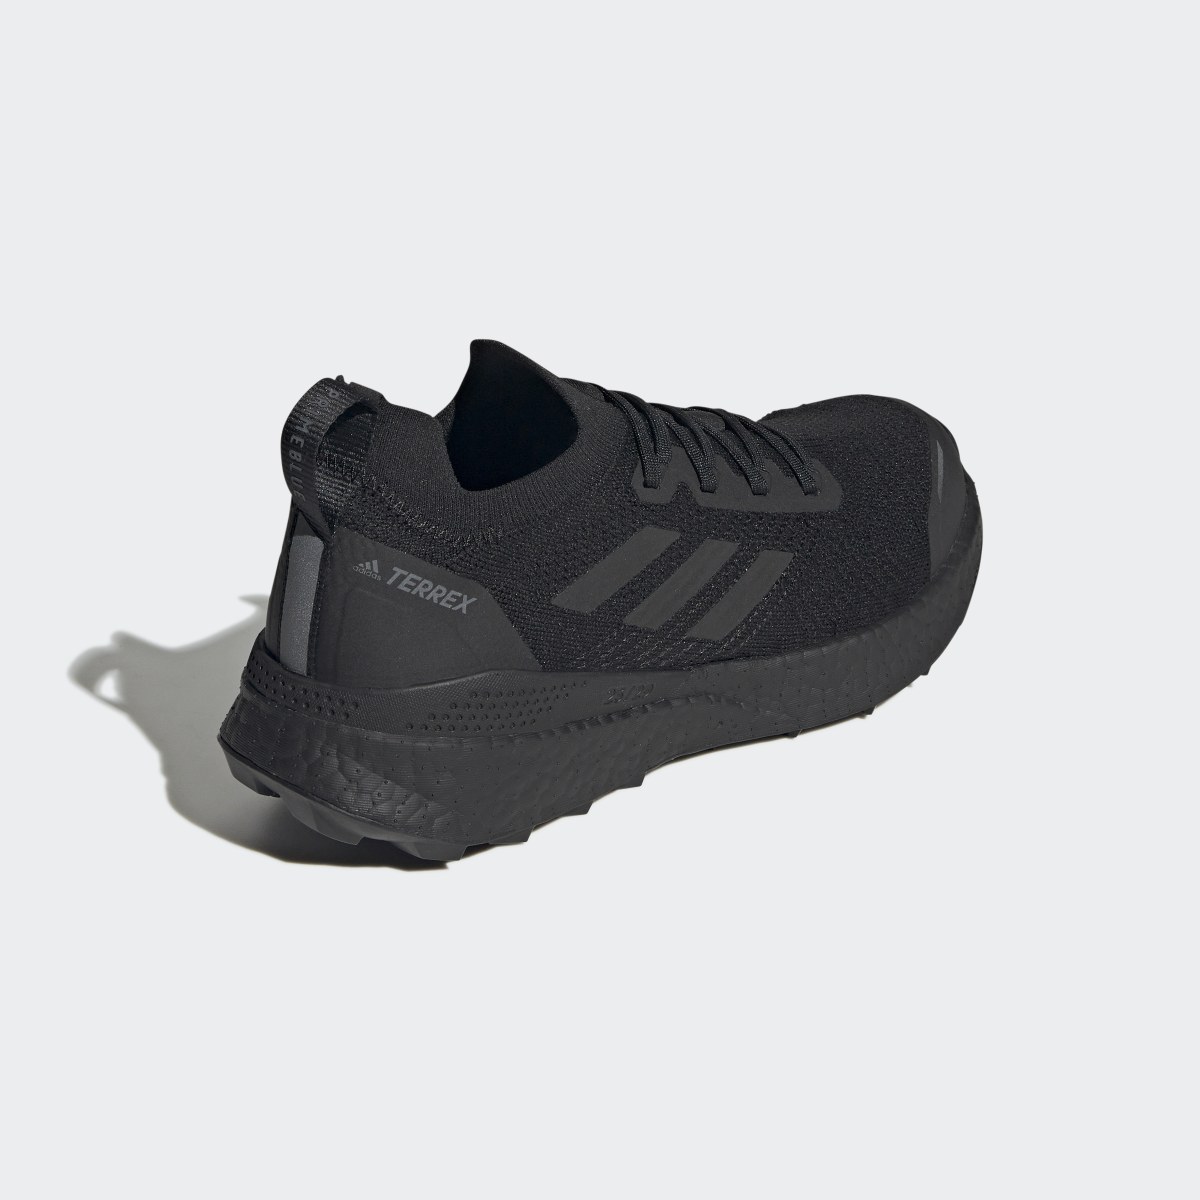 Adidas TERREX Two Ultra Trail Running Shoes. 12